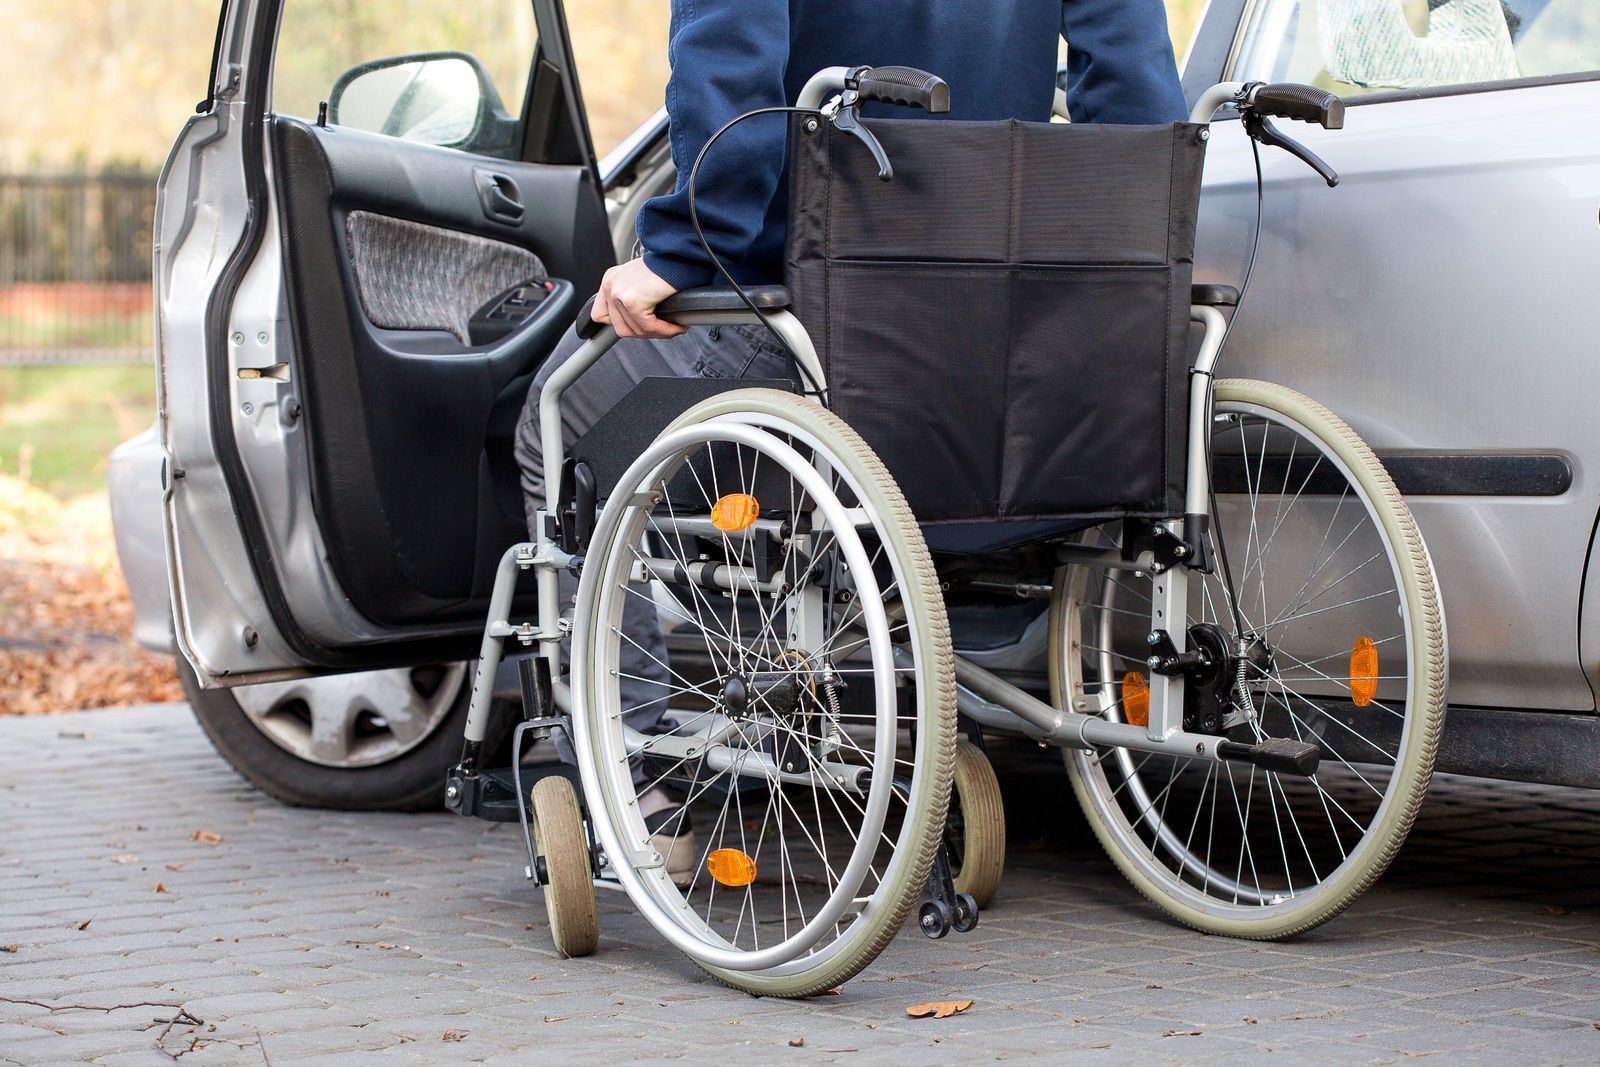 Auto Insurance for the Disabled